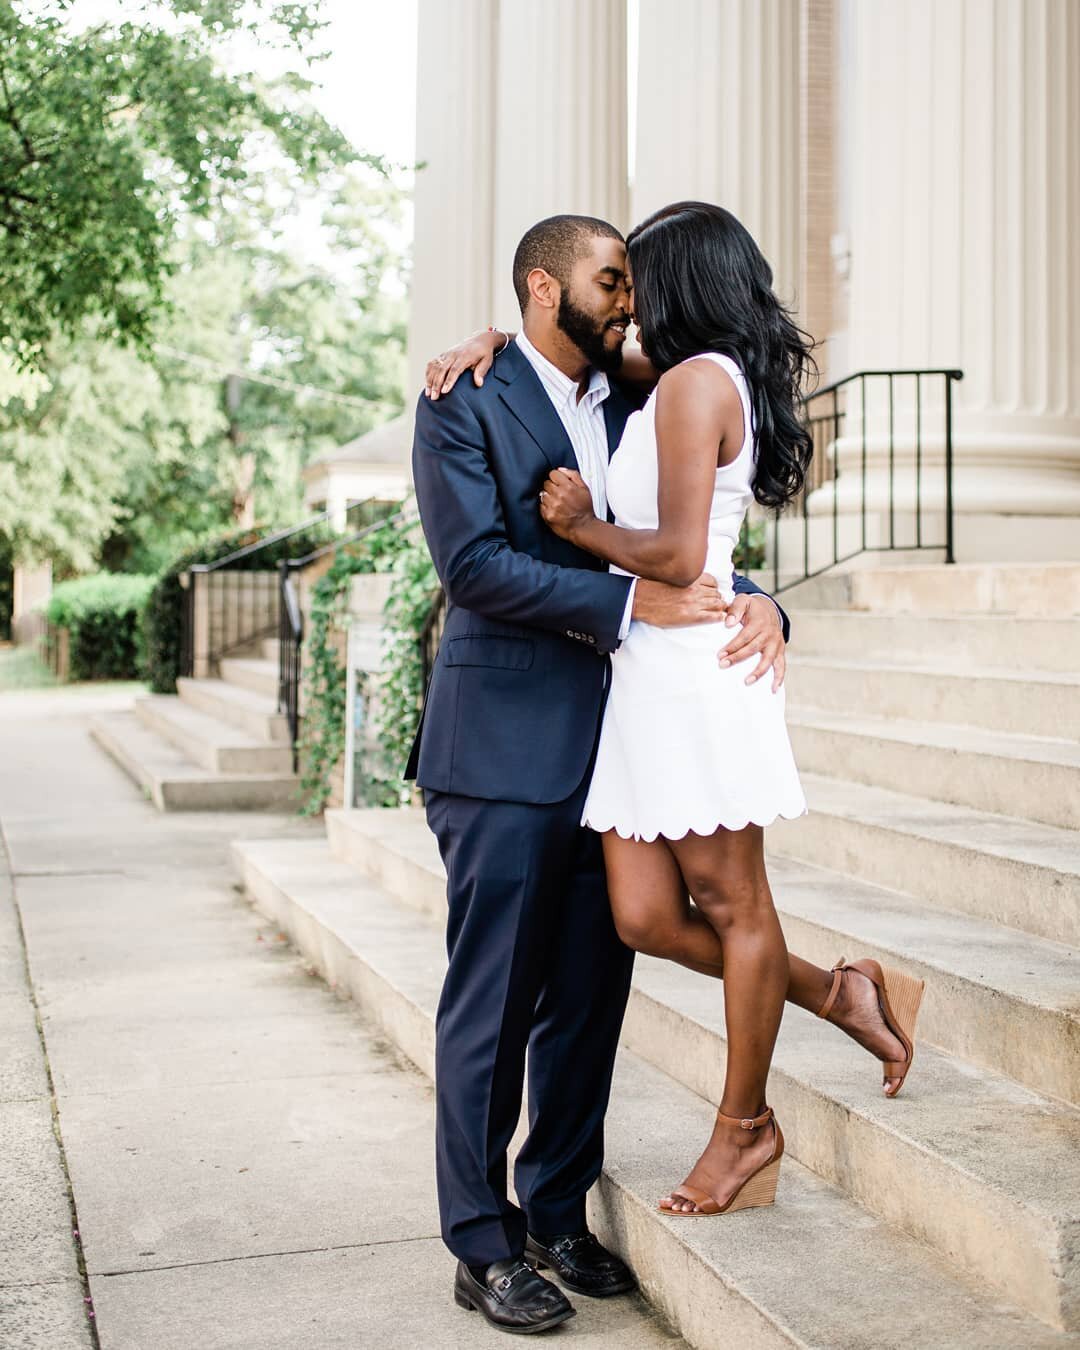 These two are just perfect together!! 💕💒💍 Engagement photos on the beautiful front steps of University Baptist Church, where Alicia &amp; Wan got engaged.
.
.
.
.
.
.
.
#incontrastimages #chapelhillengagementphotographer #chapelhillengagement #cha